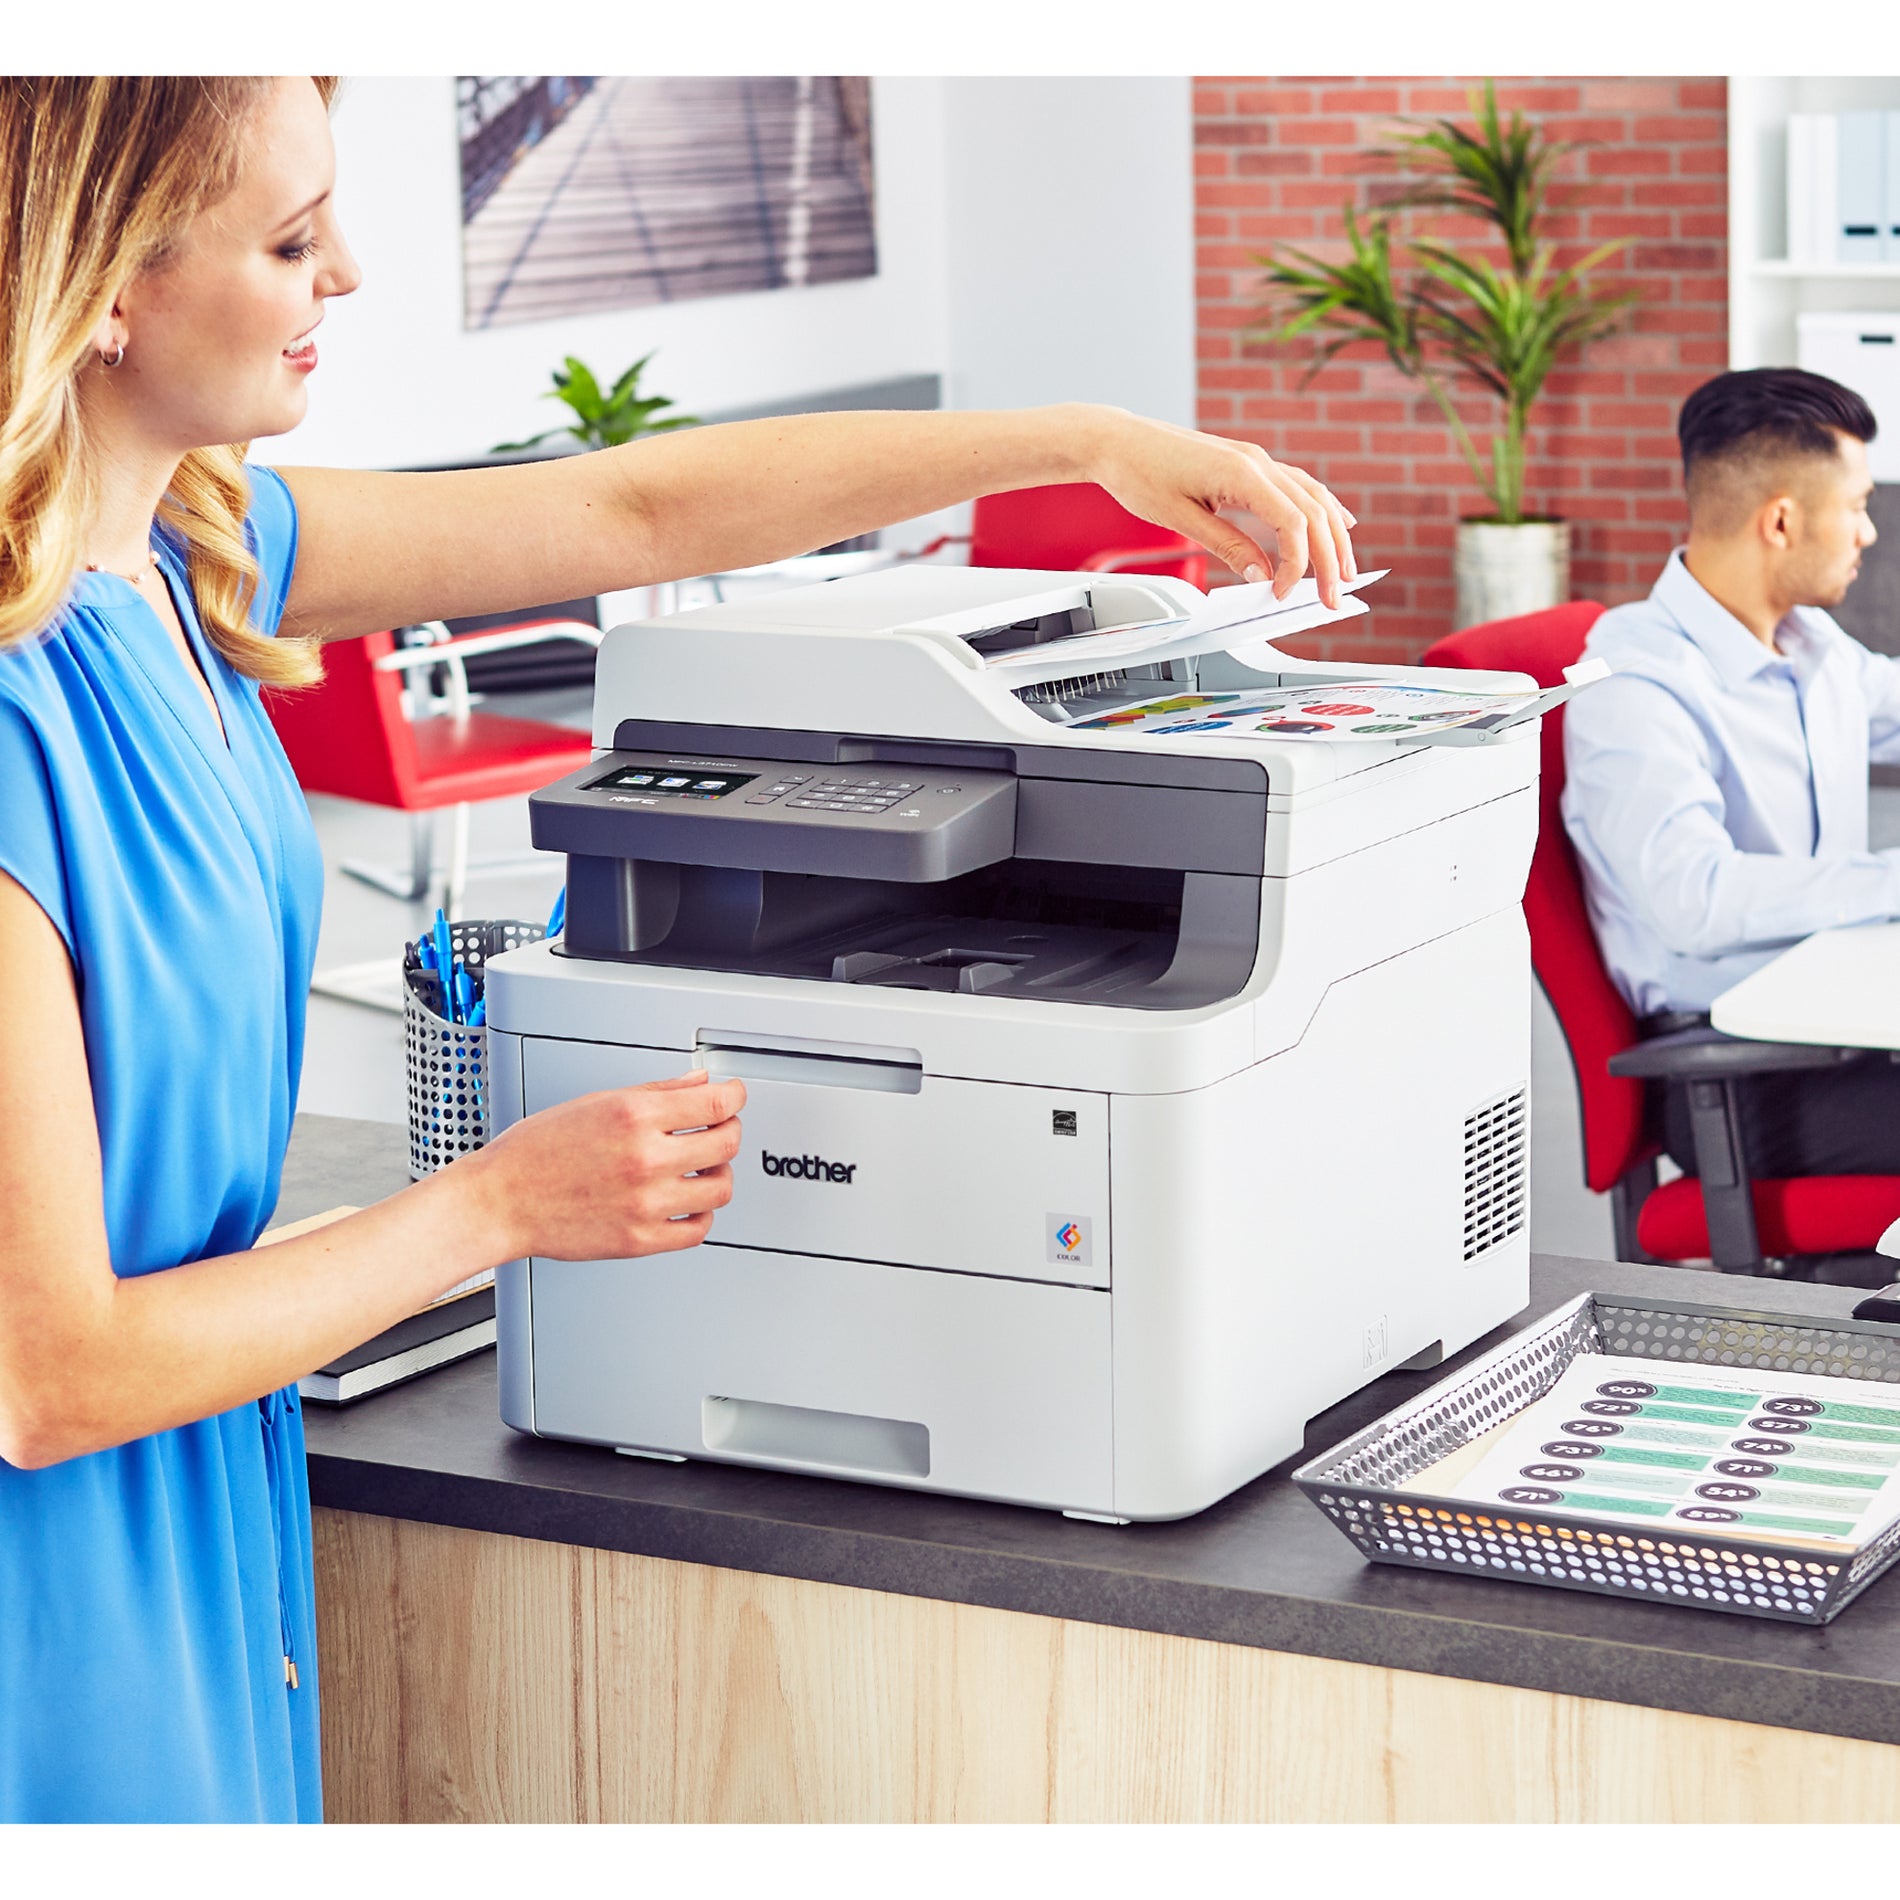 Brother MFC-L3710CW Laser Multifunction Printer, All-In-One, 19 ppm, 50-Sheet ADF, Wireless, Color